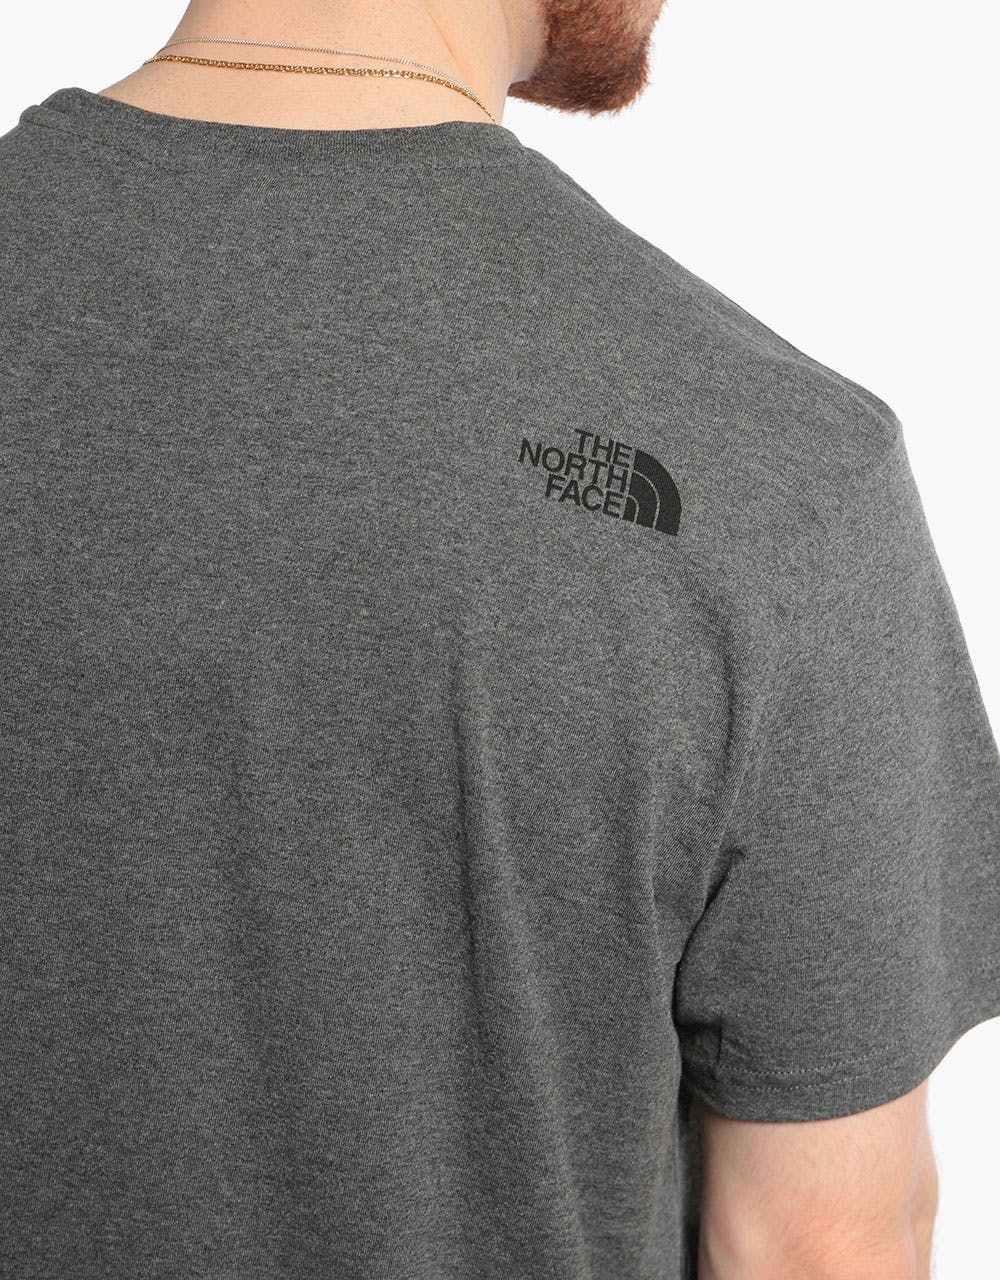 The North Face Simple Dome T-Shirt - TNF Medium Grey Heather